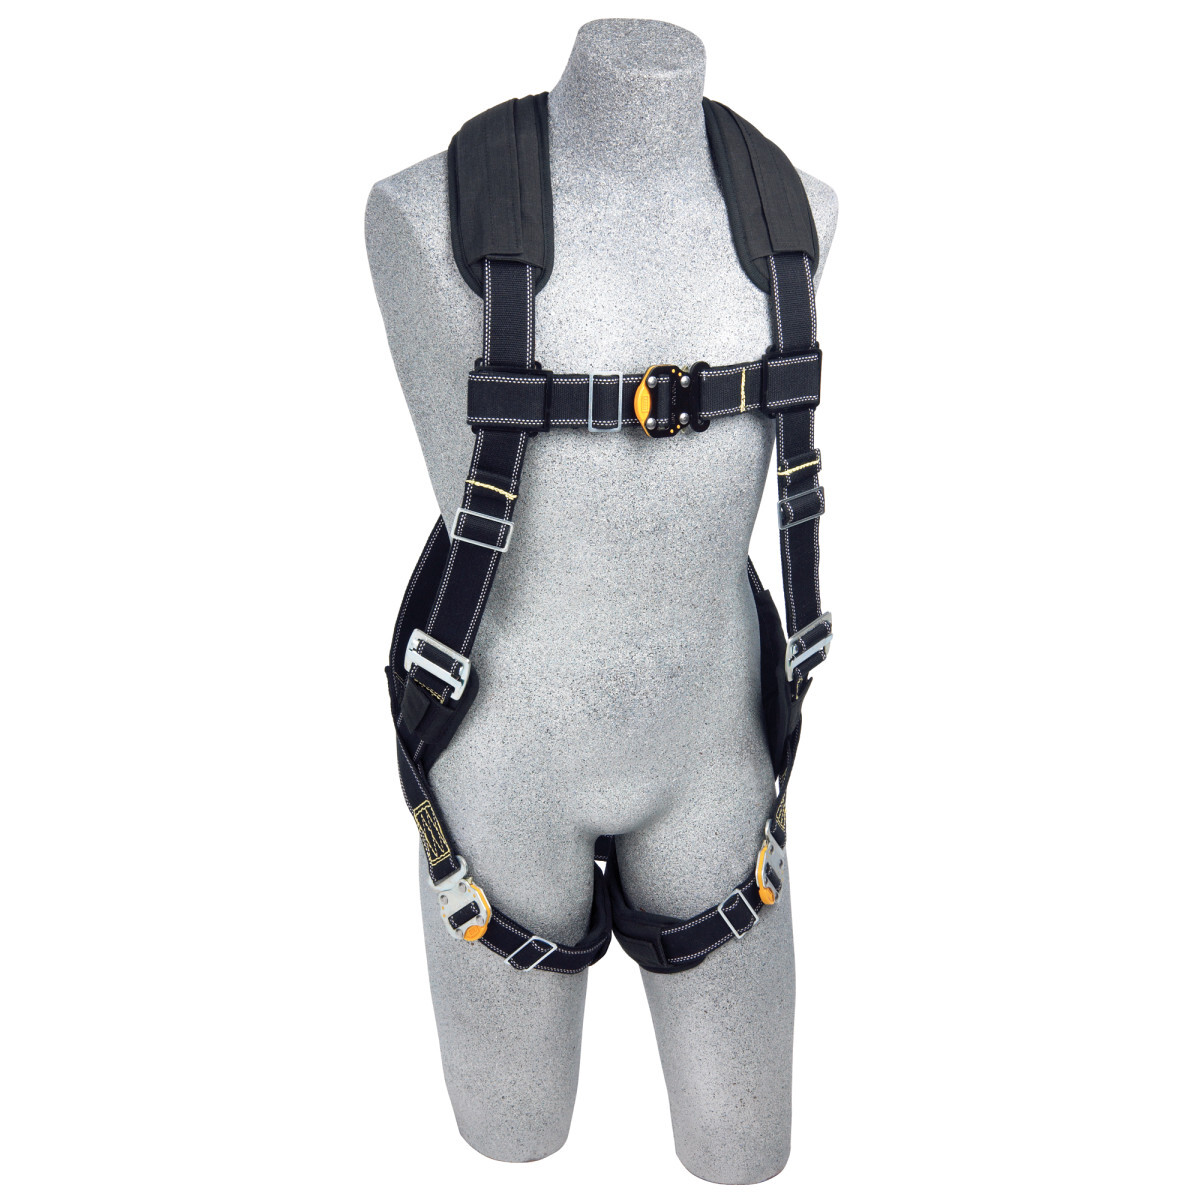 3M™ DBI-SALA® Small ExoFit™ XP Arc Flash Flame Resistant Full Body/Vest Style Harness With Back D-Ring, Comfort Padding, Leather